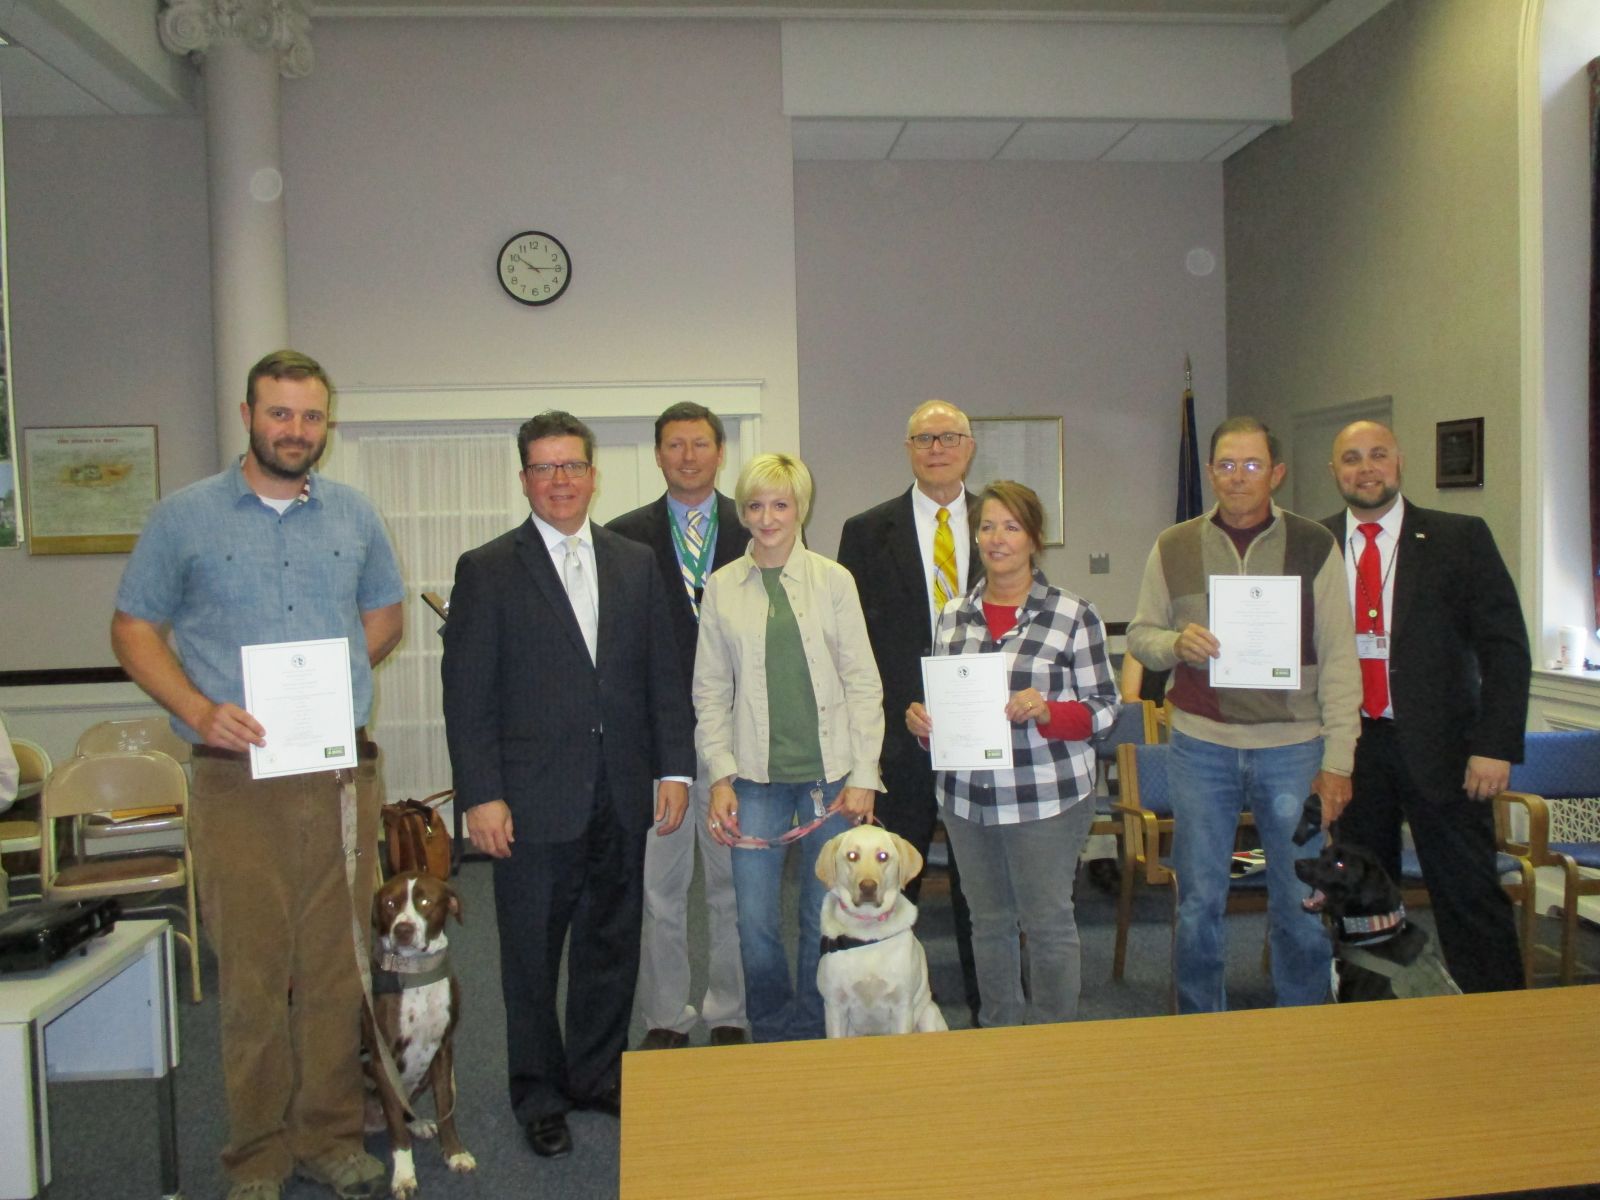 Pictured L to R are:    Alex Reed with Turk; Chairman David Keller; John McPaul, VA Community Outreach & Events Coordinator; Kami Emerick, Trainer with Skyler, Commissioner Robert Thomas; Helen Carlson, Dog Trainer; Ken Hadley with Jango; and Justin Slep, VA Director.